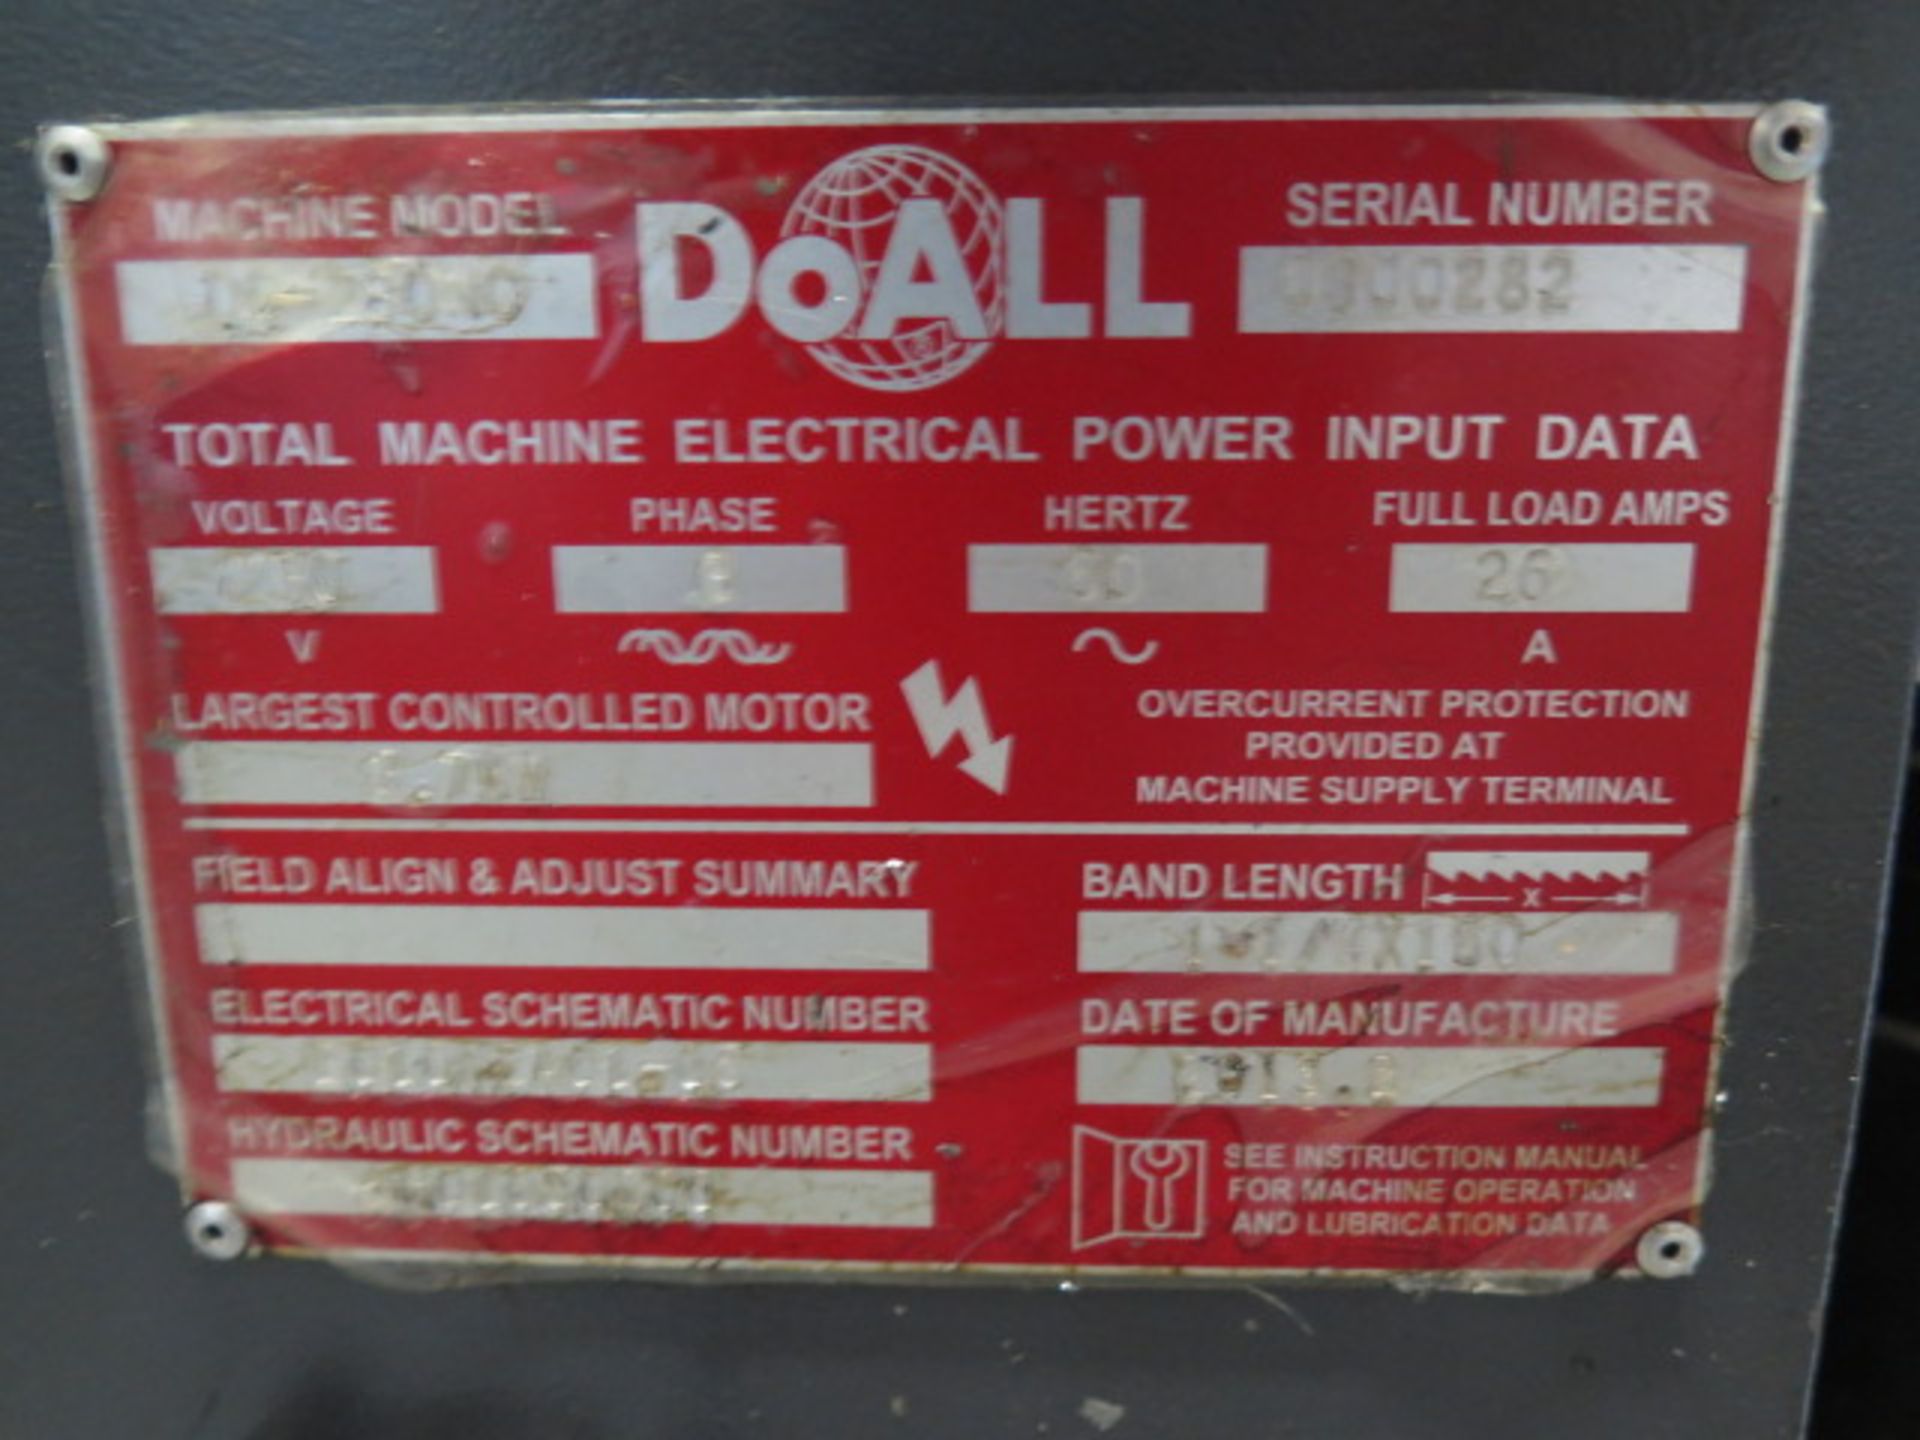 DoAll “Continental Series” mdl. DC-280NC 11” Automatic Hydraulic Horizontal Band Saw s/n 0300282 - Image 12 of 12